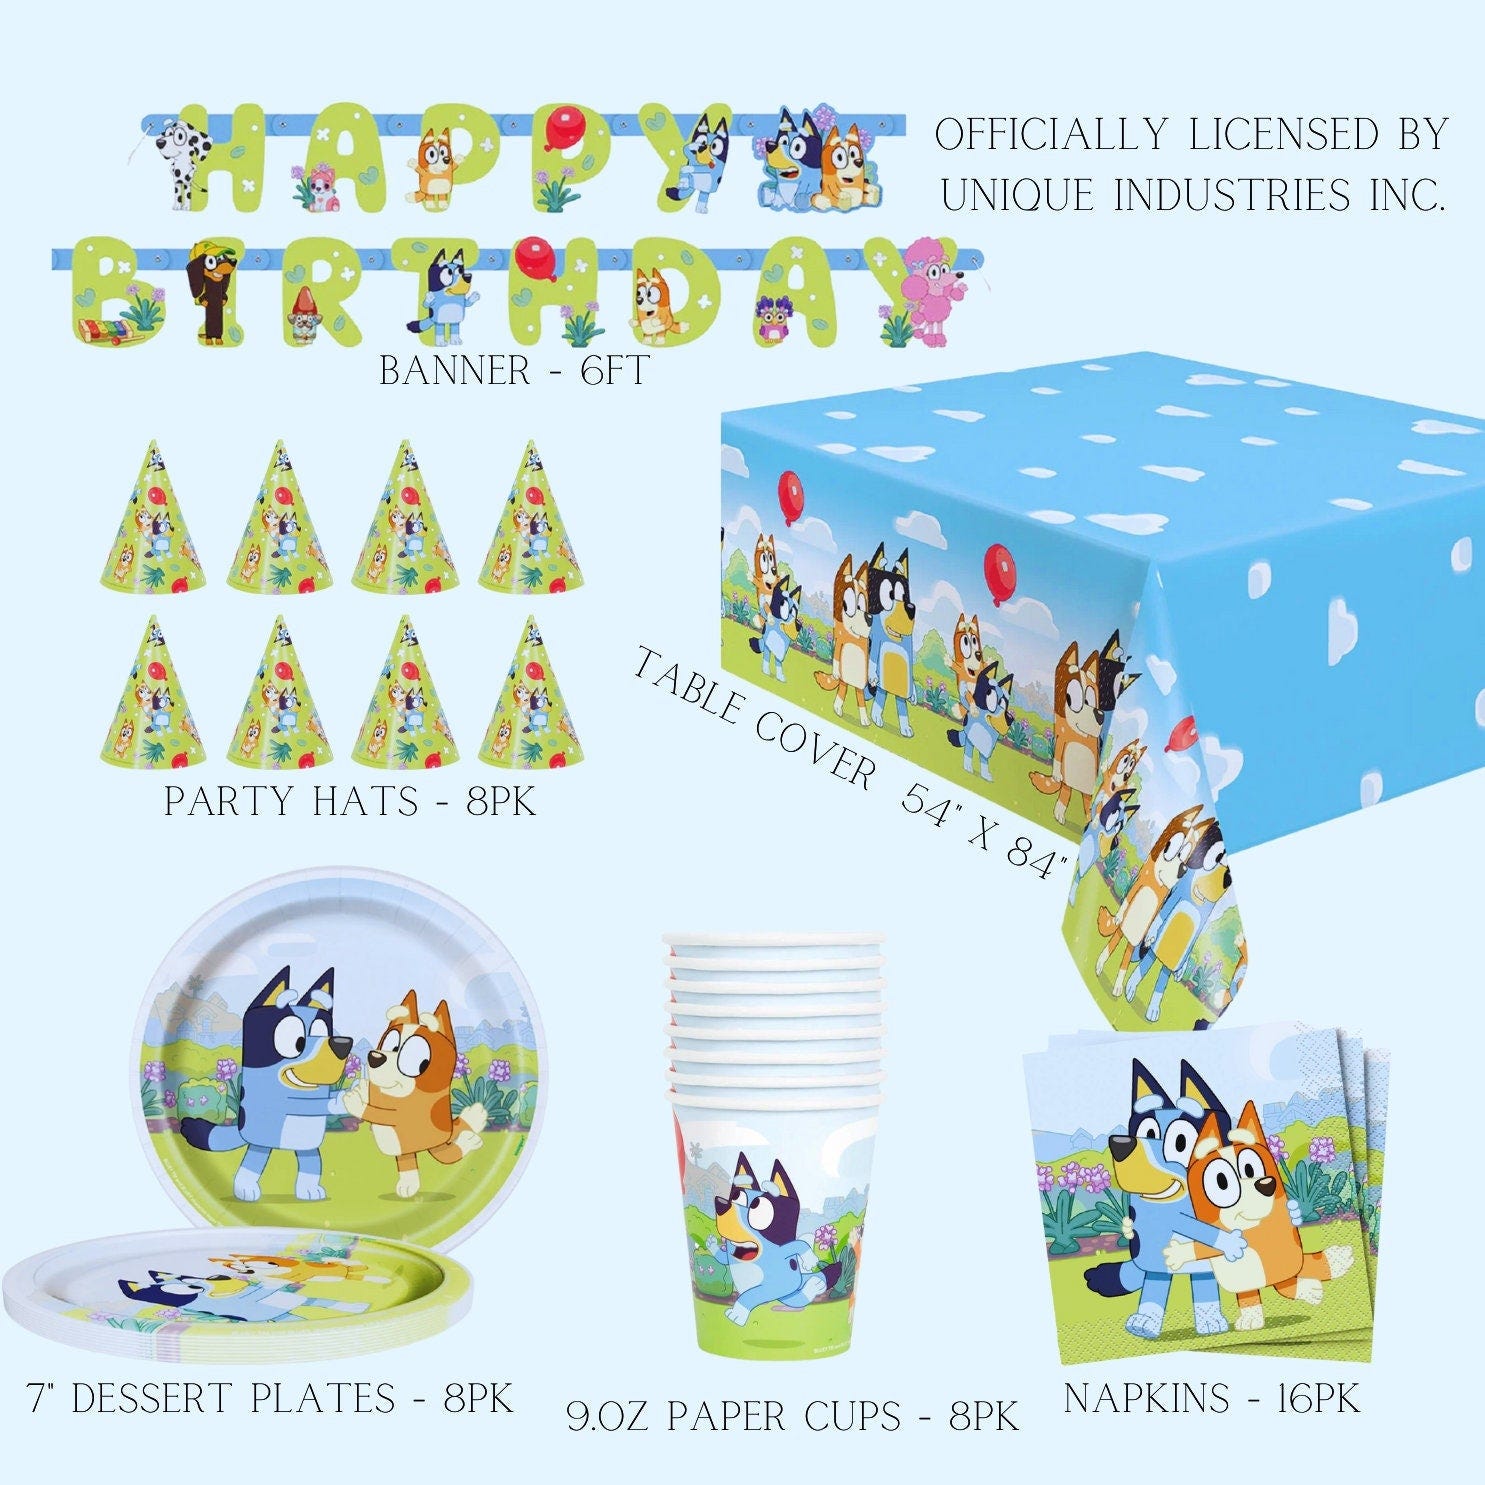 Bluey Birthday Banner 6ft - Officially Licensed by Unique Industries | Bluey Birthday Decoration | Bluey Party | Blue Dog | Bluey Tableware